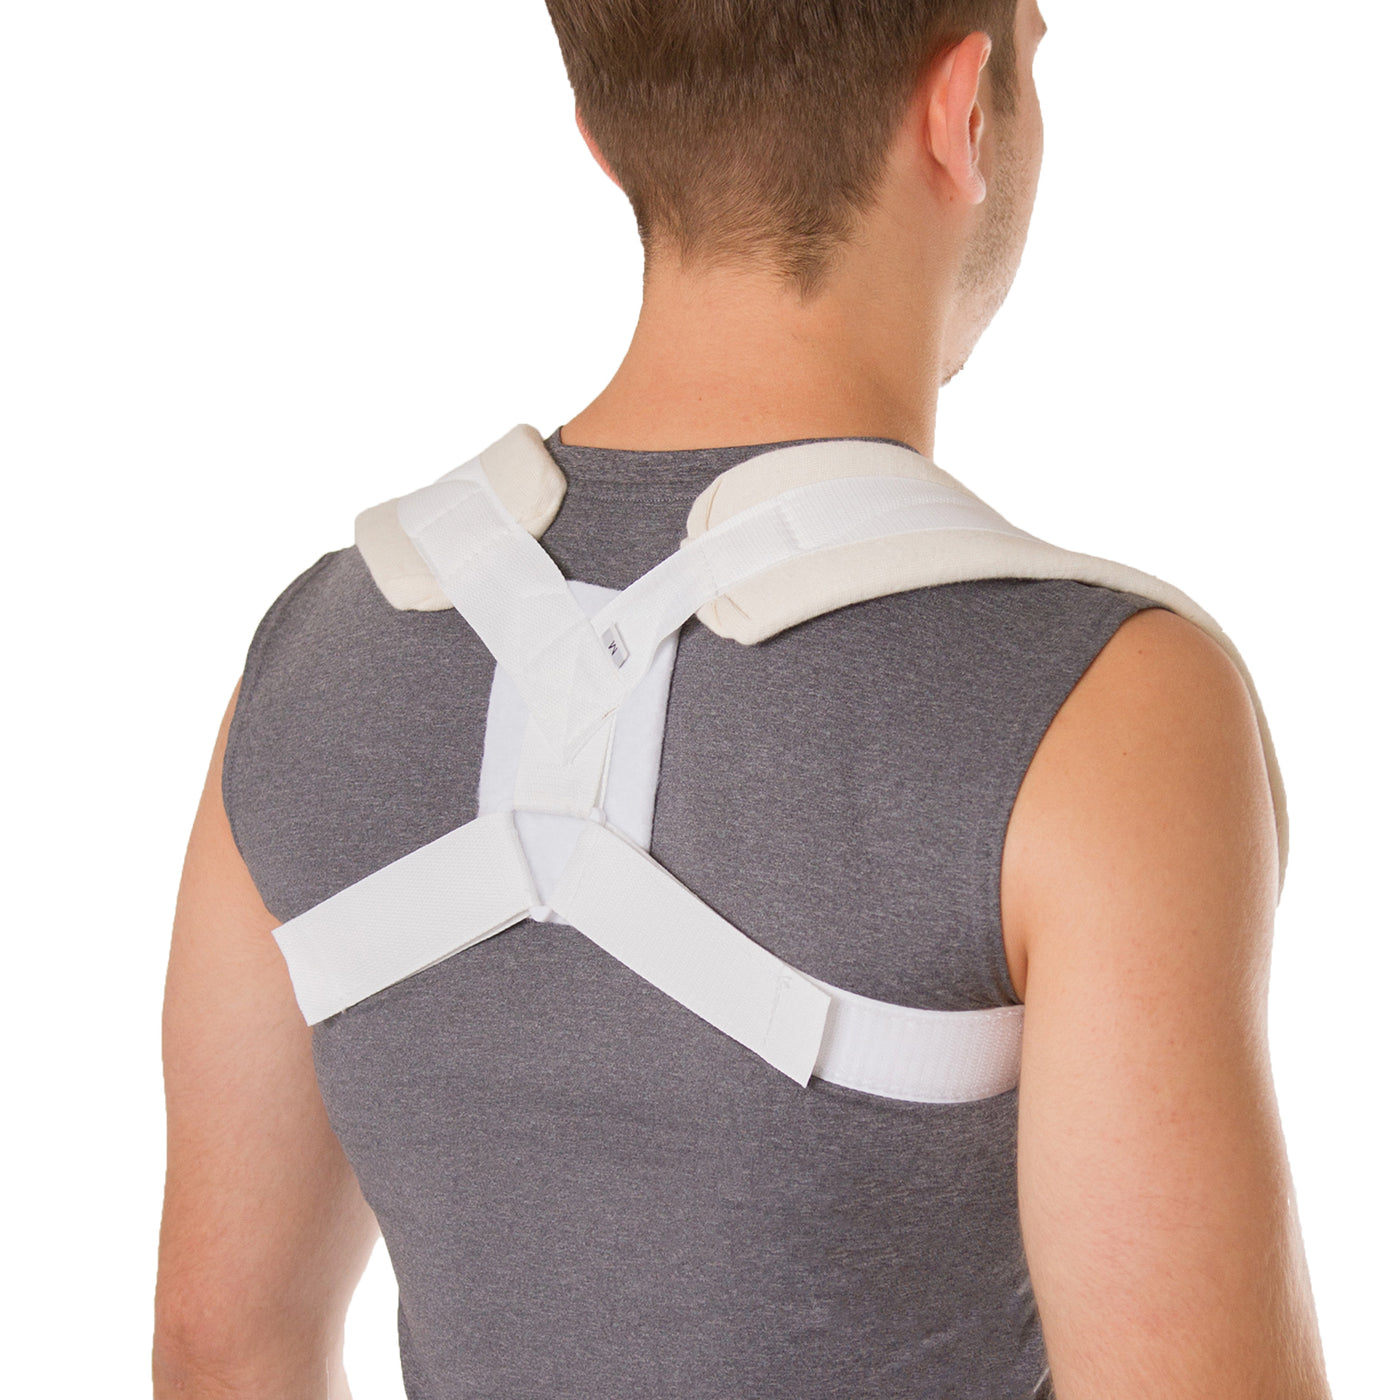 1/2 inchPADDED Compression Shirt SHOULDER COLLARBONE CHEST